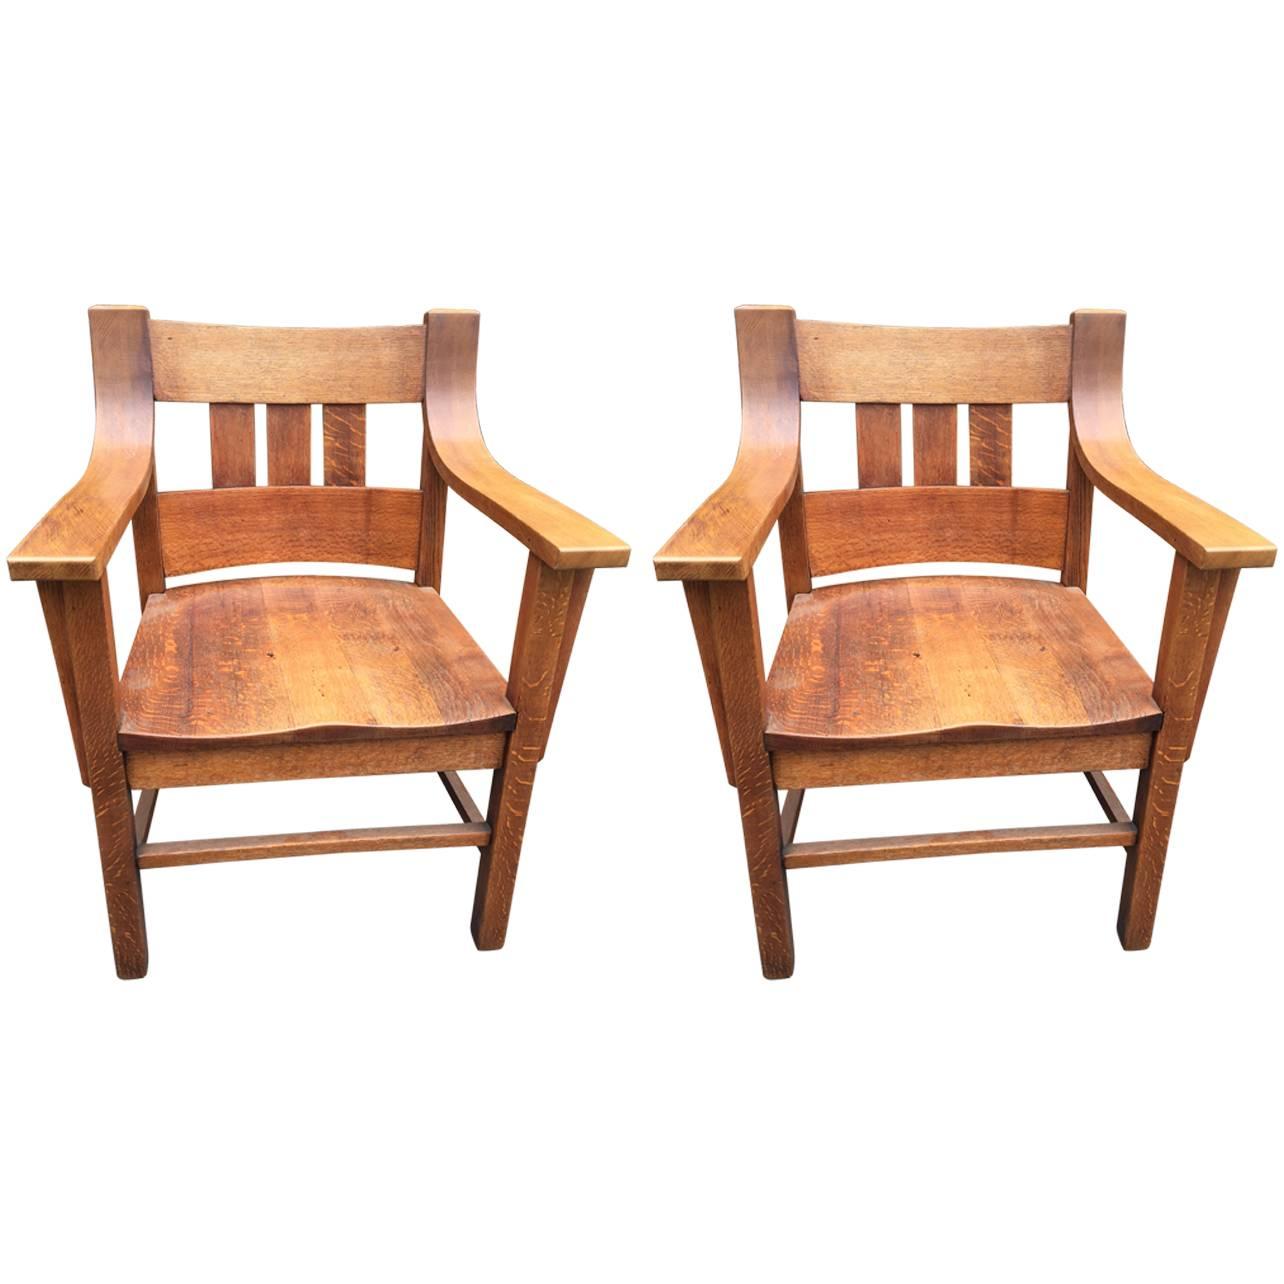 Pair of Stickley Chairs, American, circa 1900